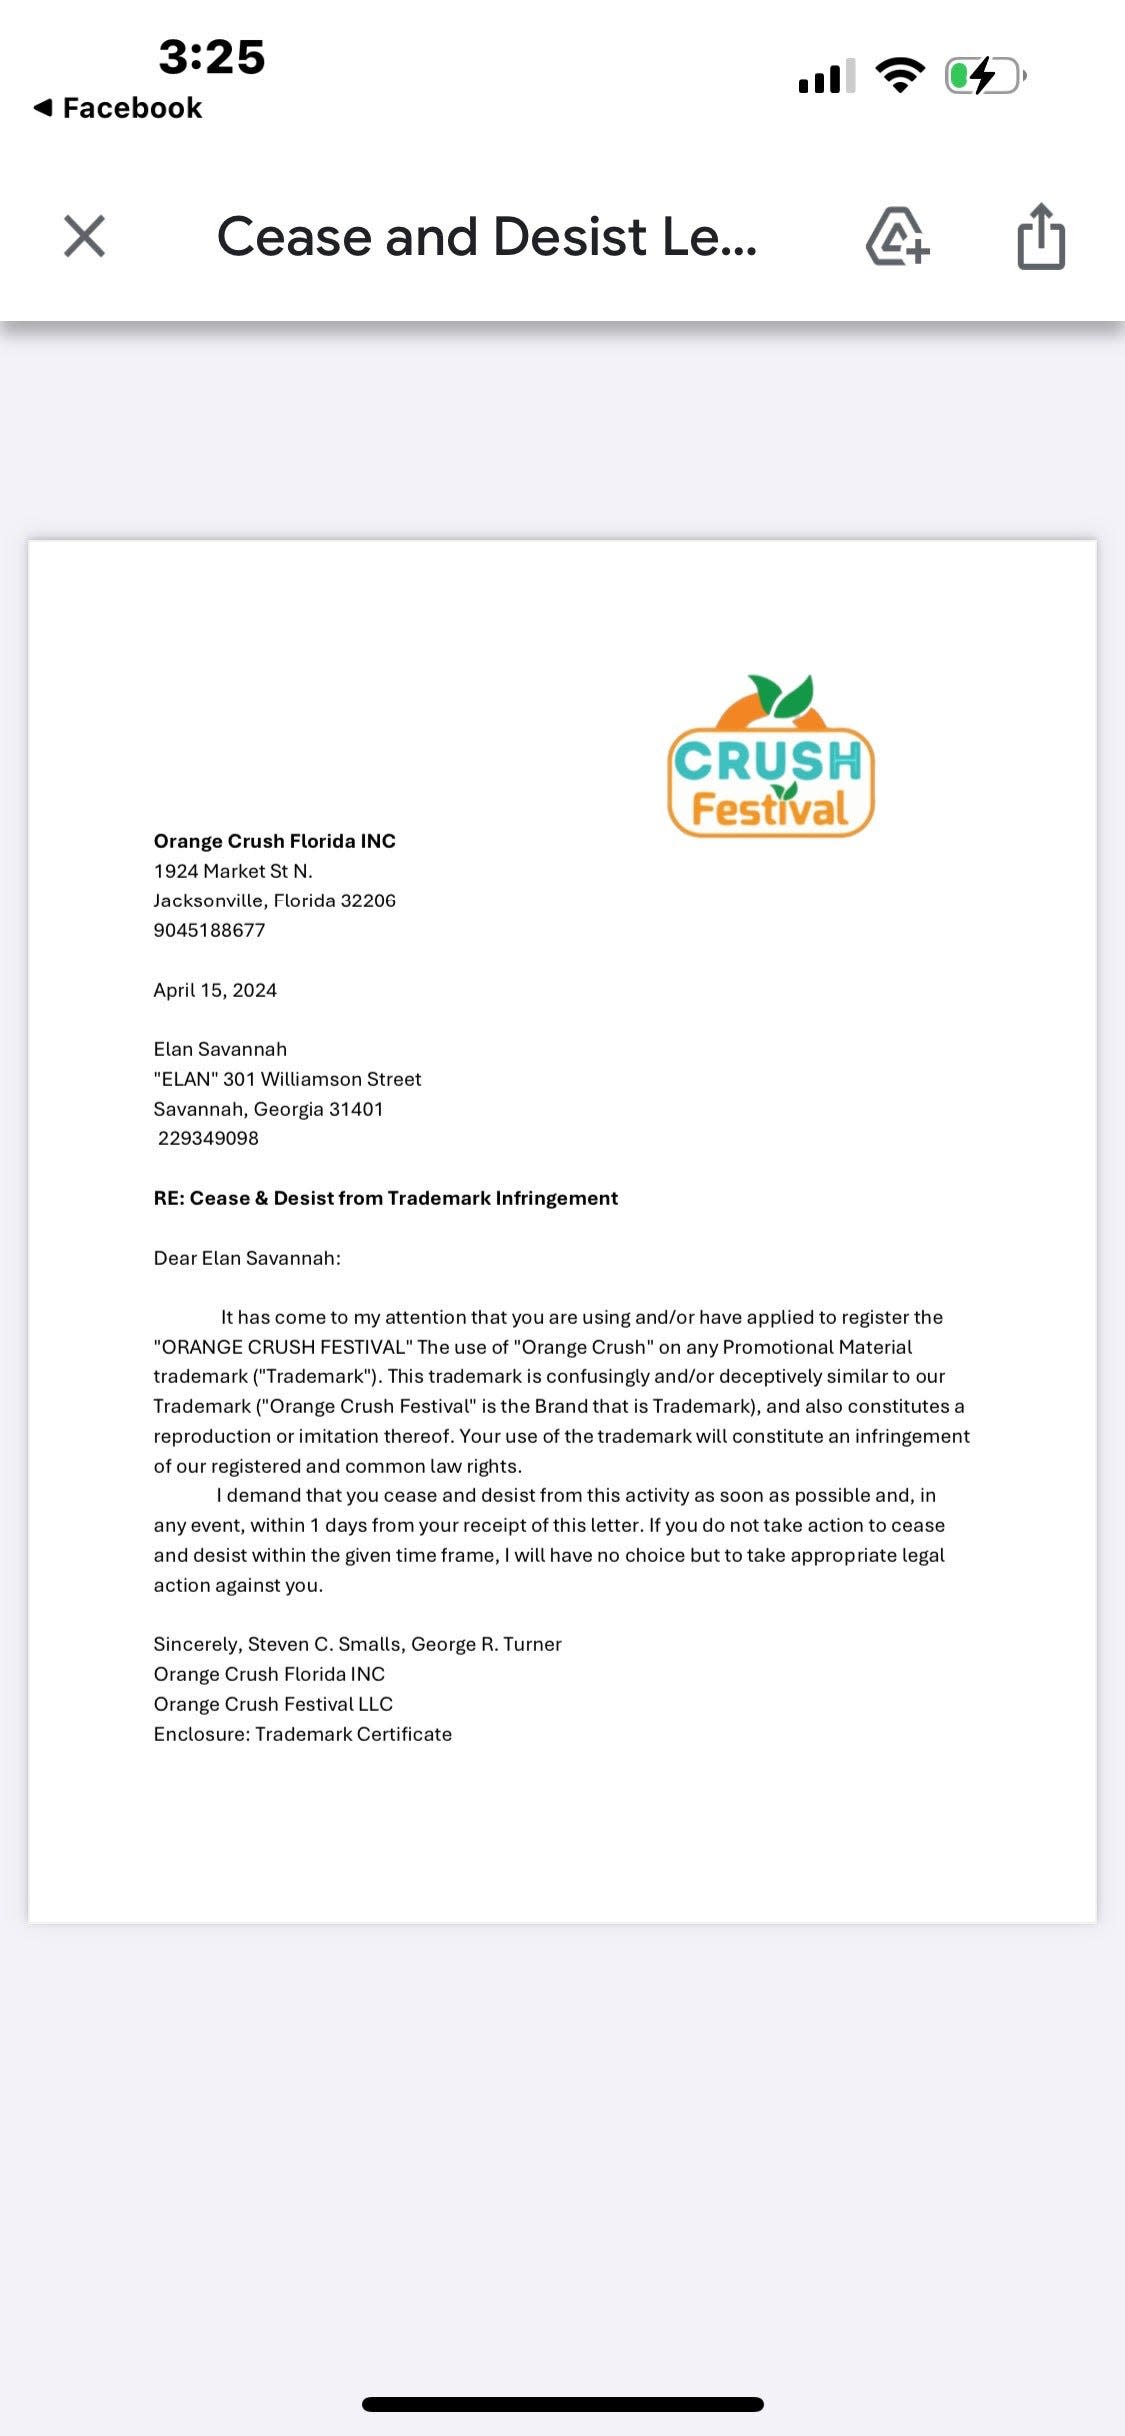 Cease and desist letter from the trademark holder for Orange Crush George Turner to Elan Savannah.